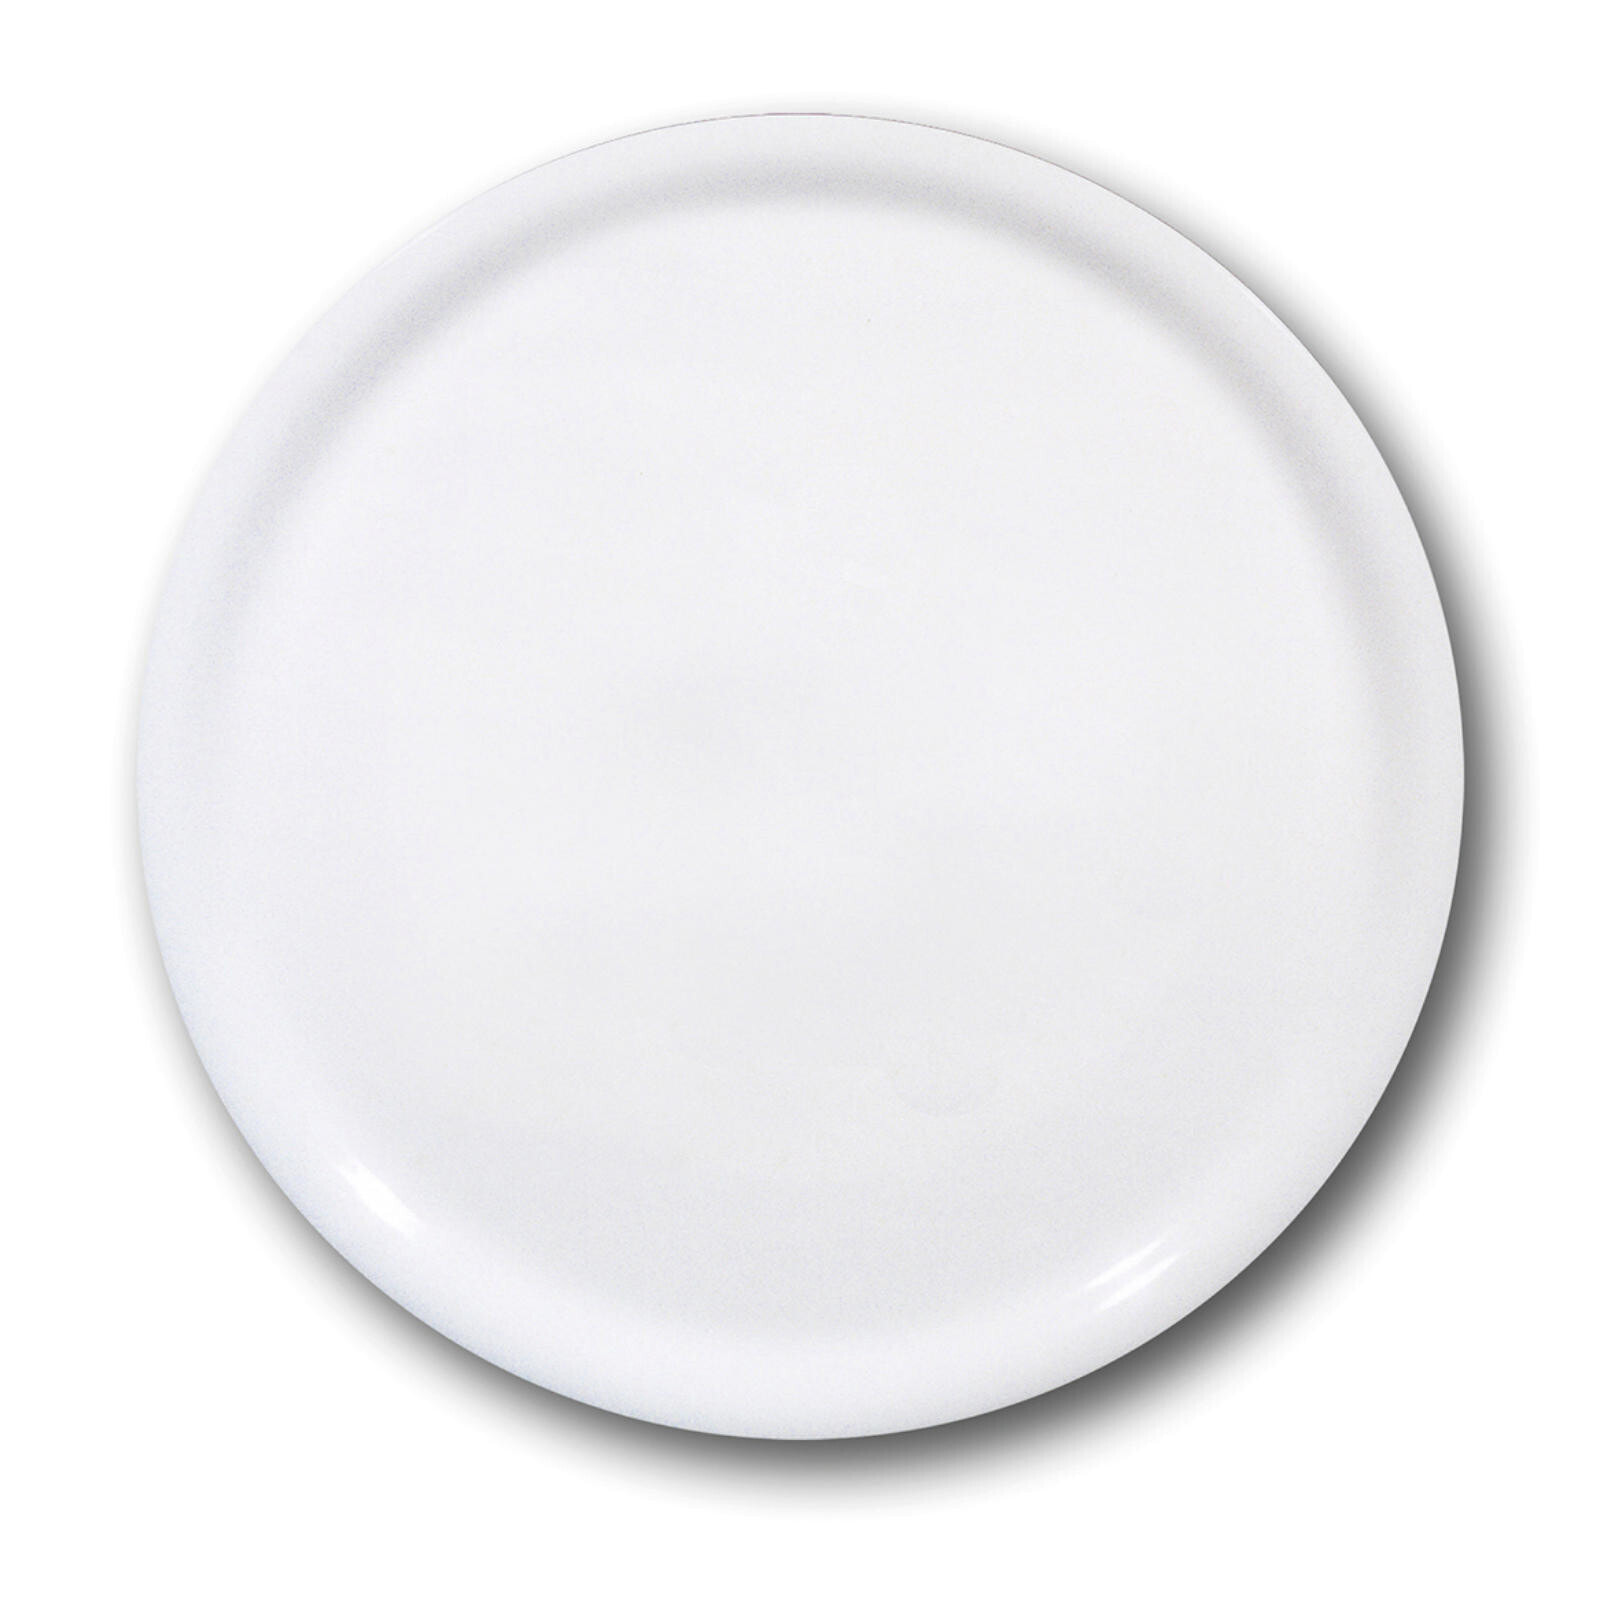 Durable porcelain pizza plate Speciale white 330mm - set of 6